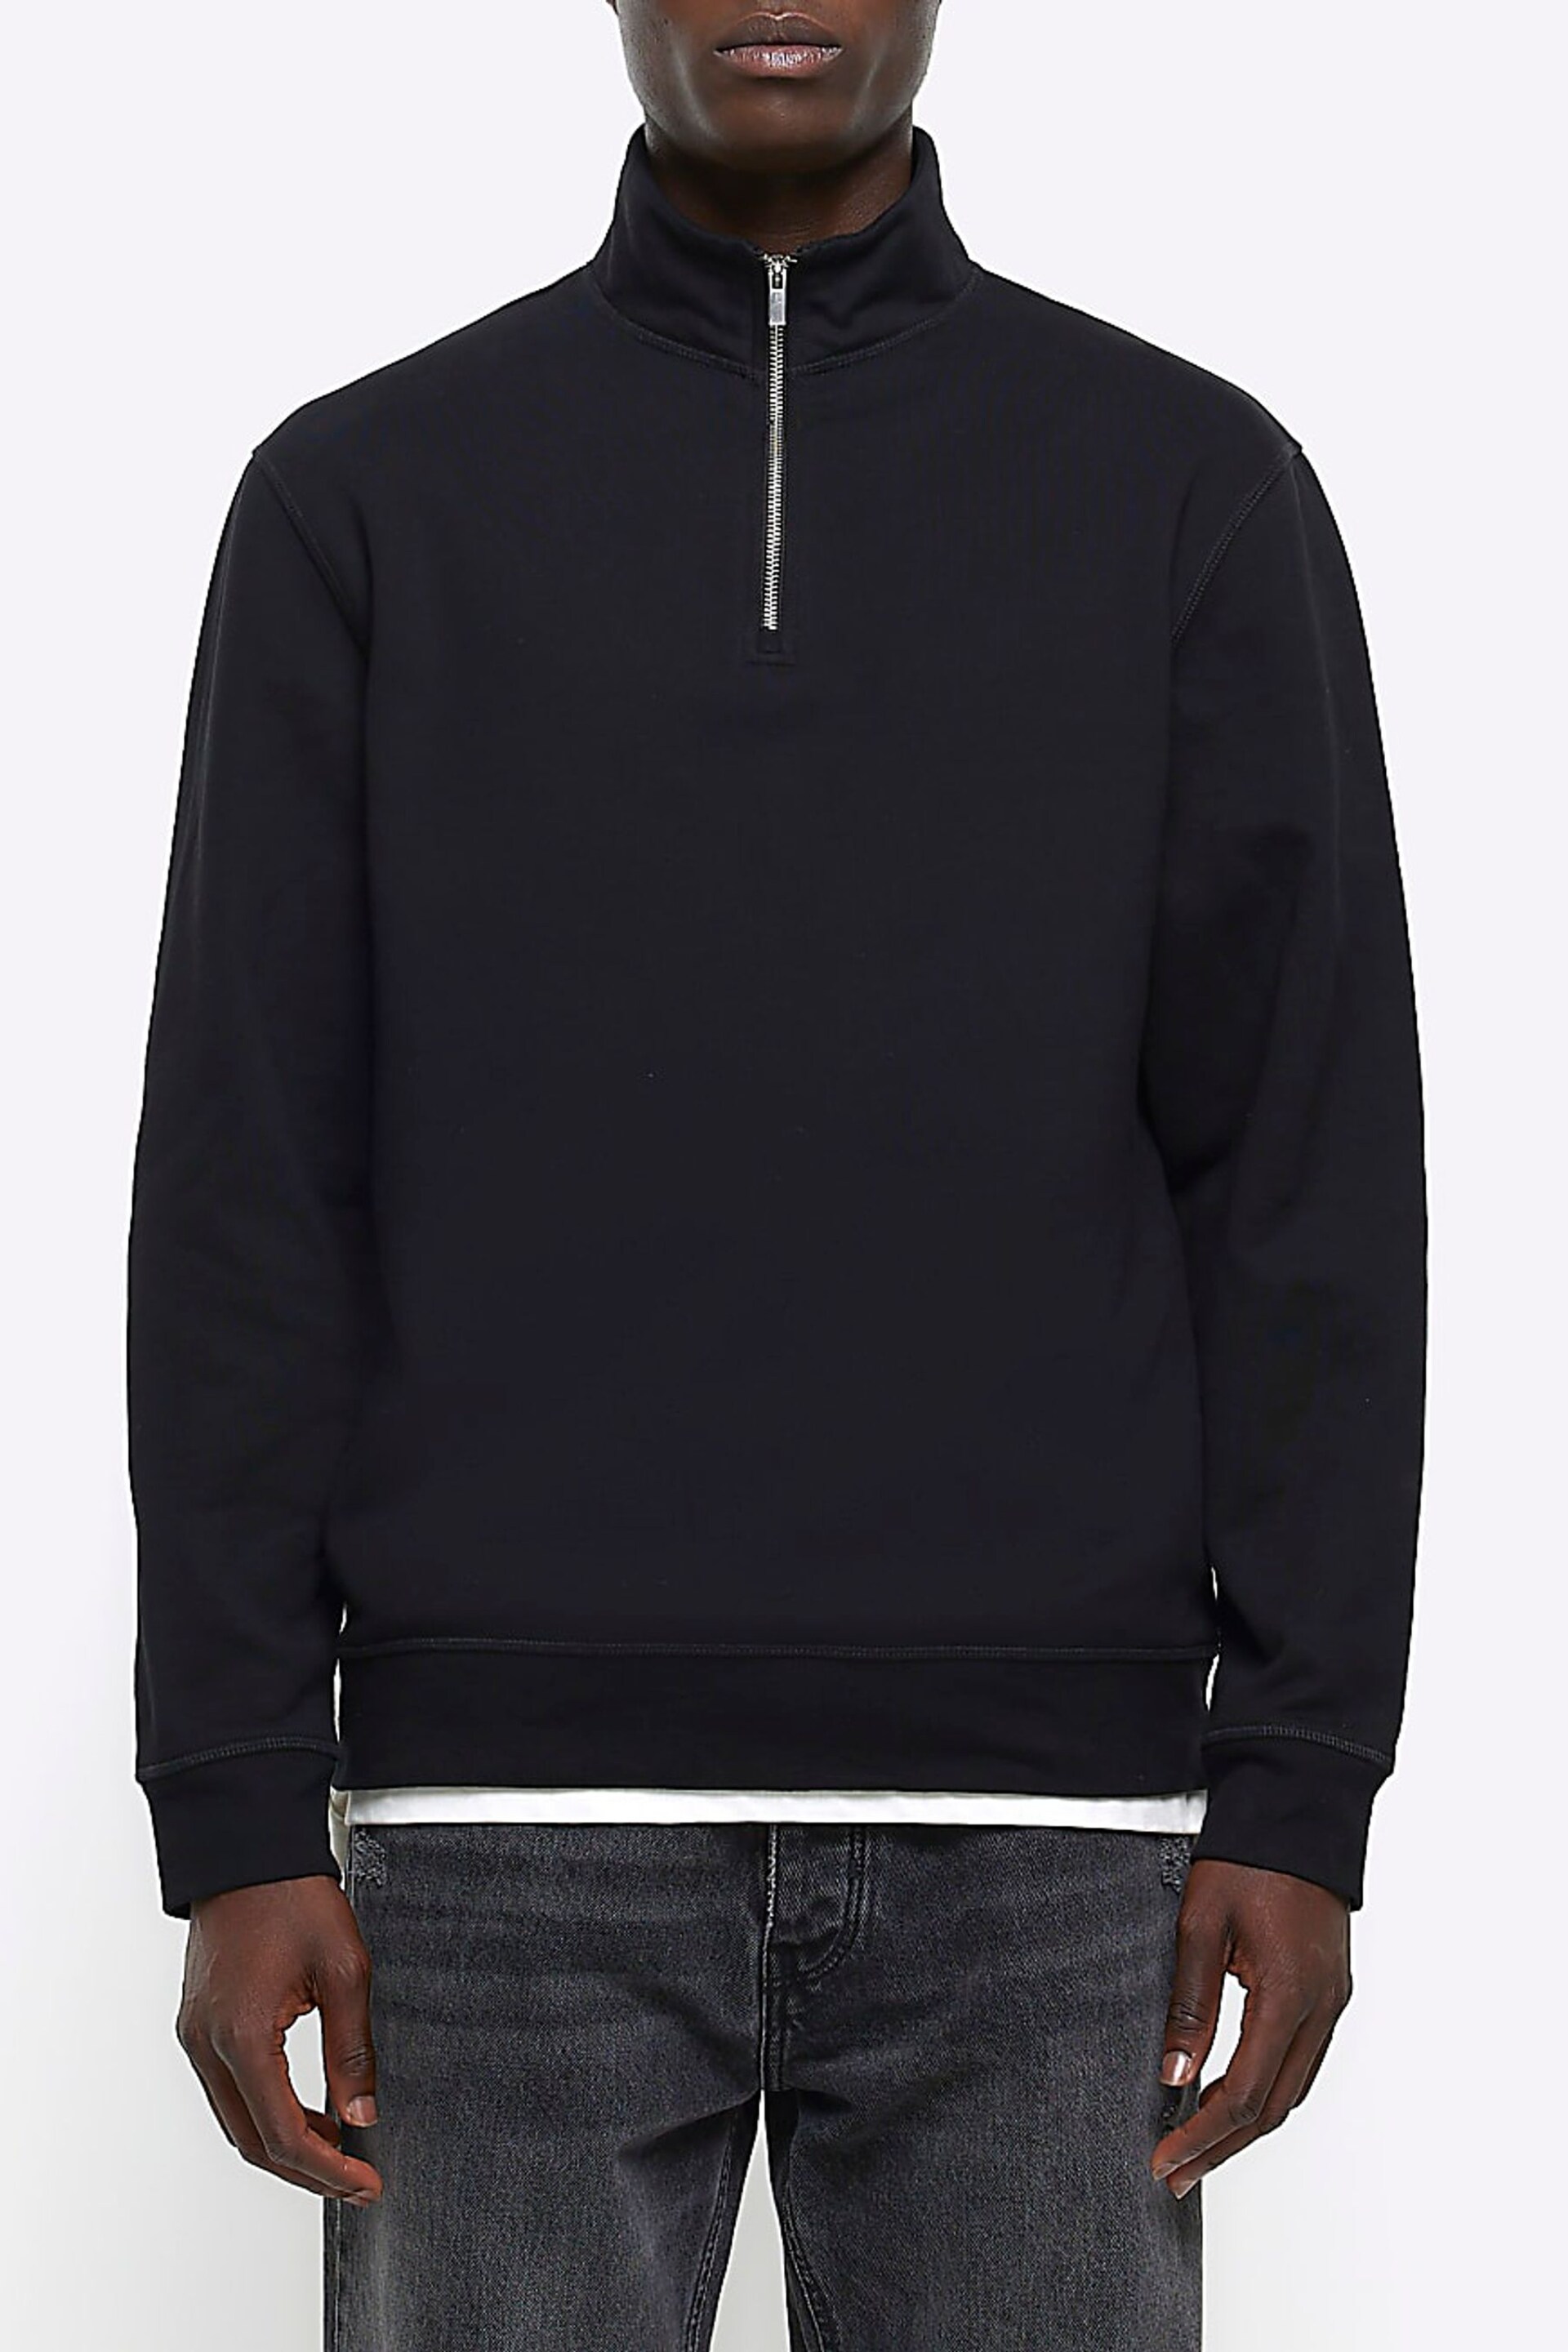 River Island Black Funnel Neck Polo Hoodie - Image 1 of 4